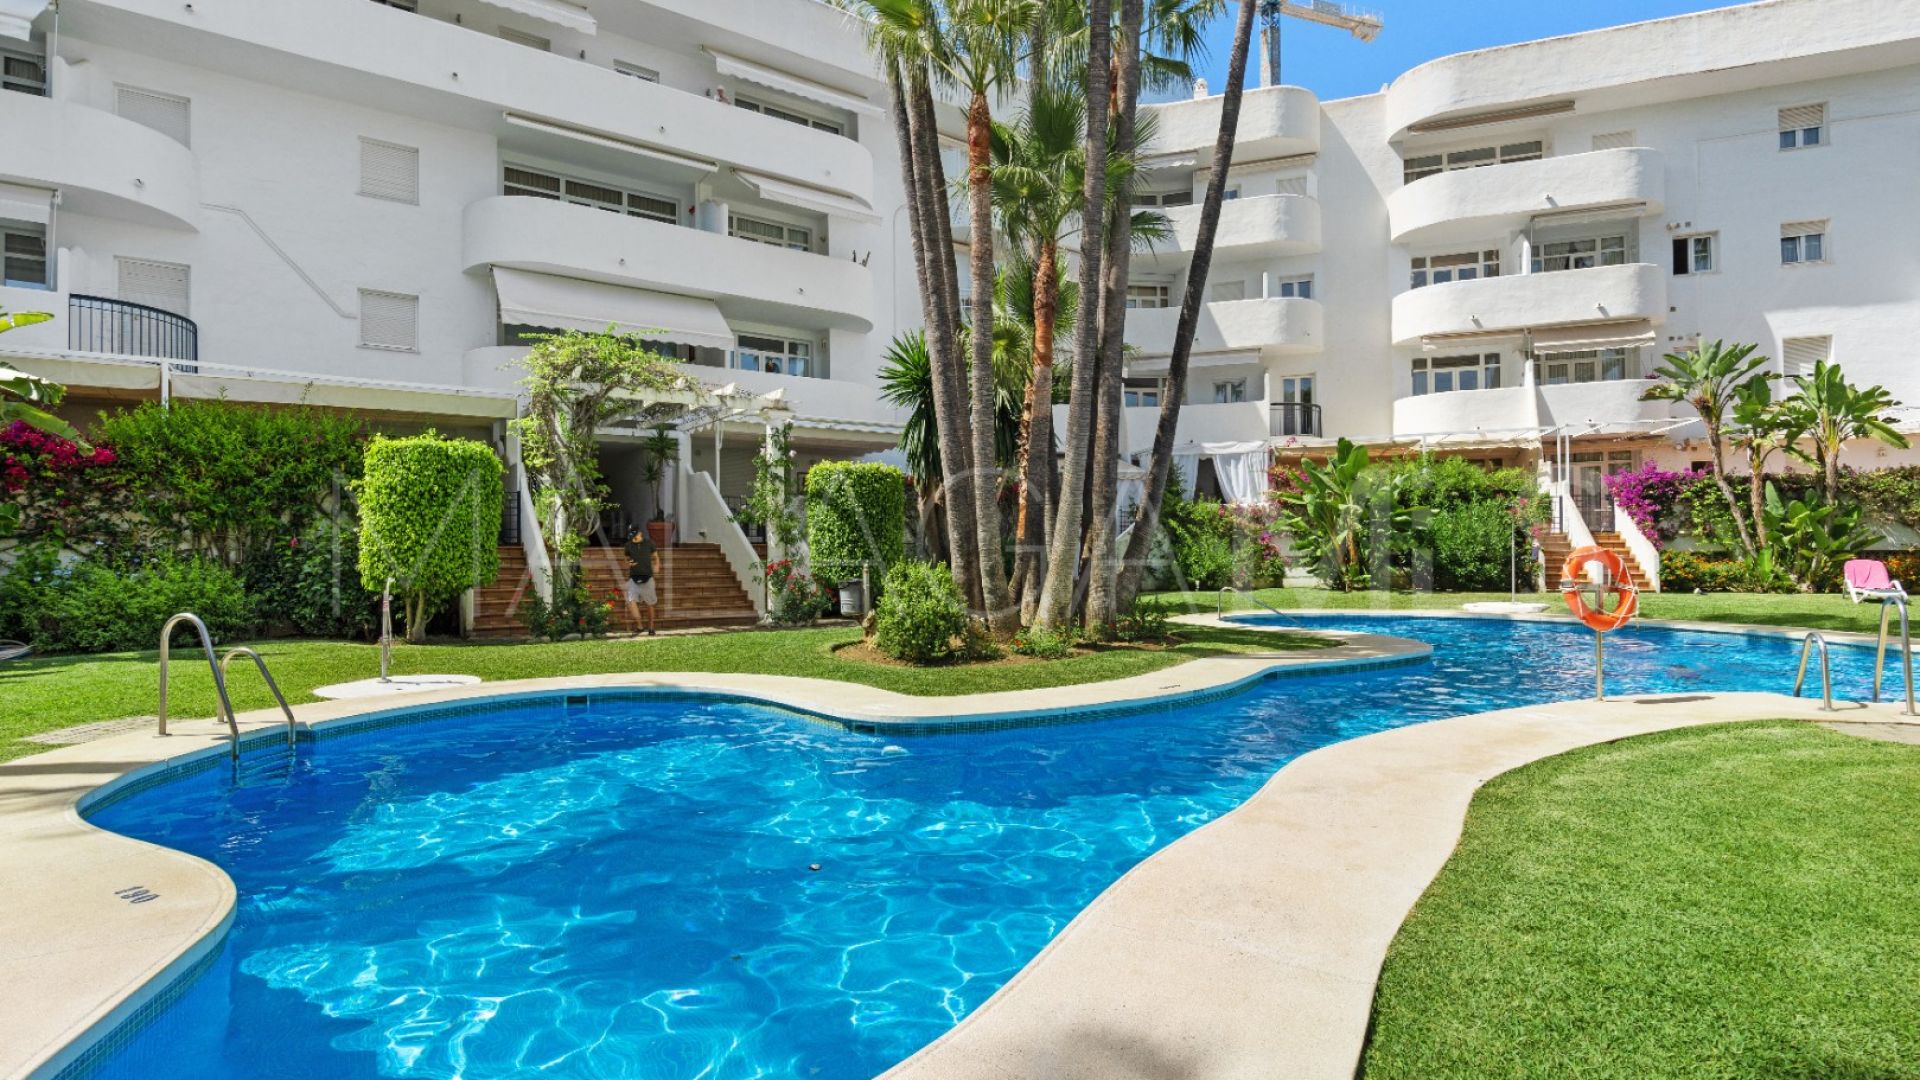 2 bedrooms apartment for sale in Marbella Real